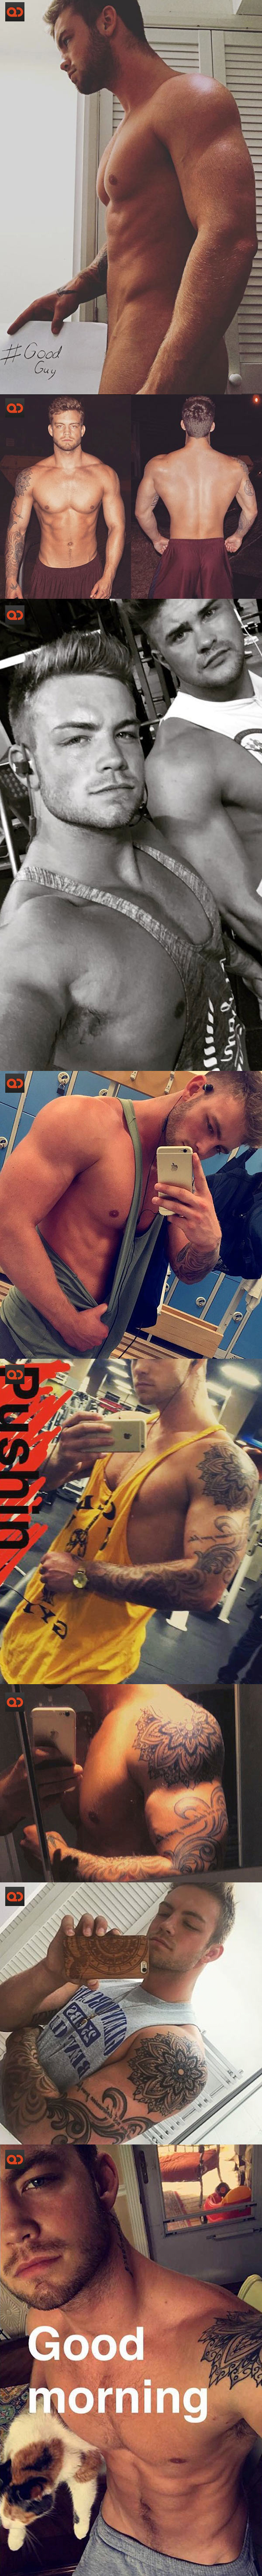 Dustin McNeer, From ANTM, New Cock Pic Surfaces!